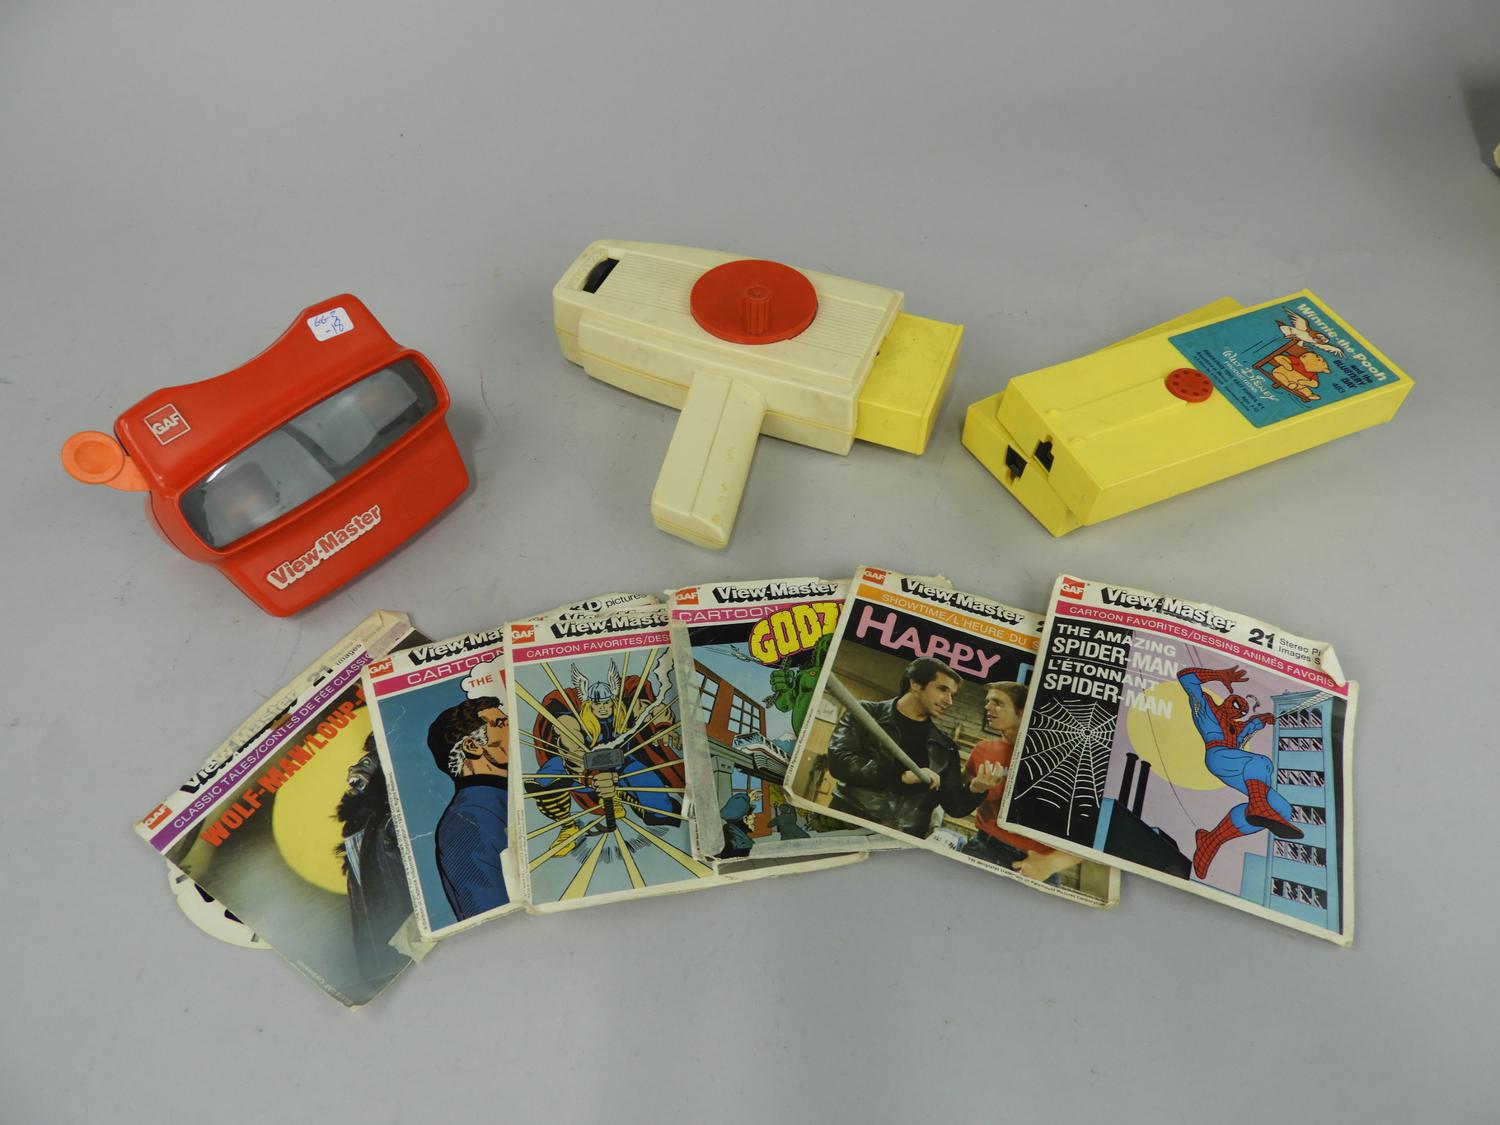 Murrays Auctioneers - Lot 345: View Master with reels including Spiderman,  Thor, Hulk, etc.